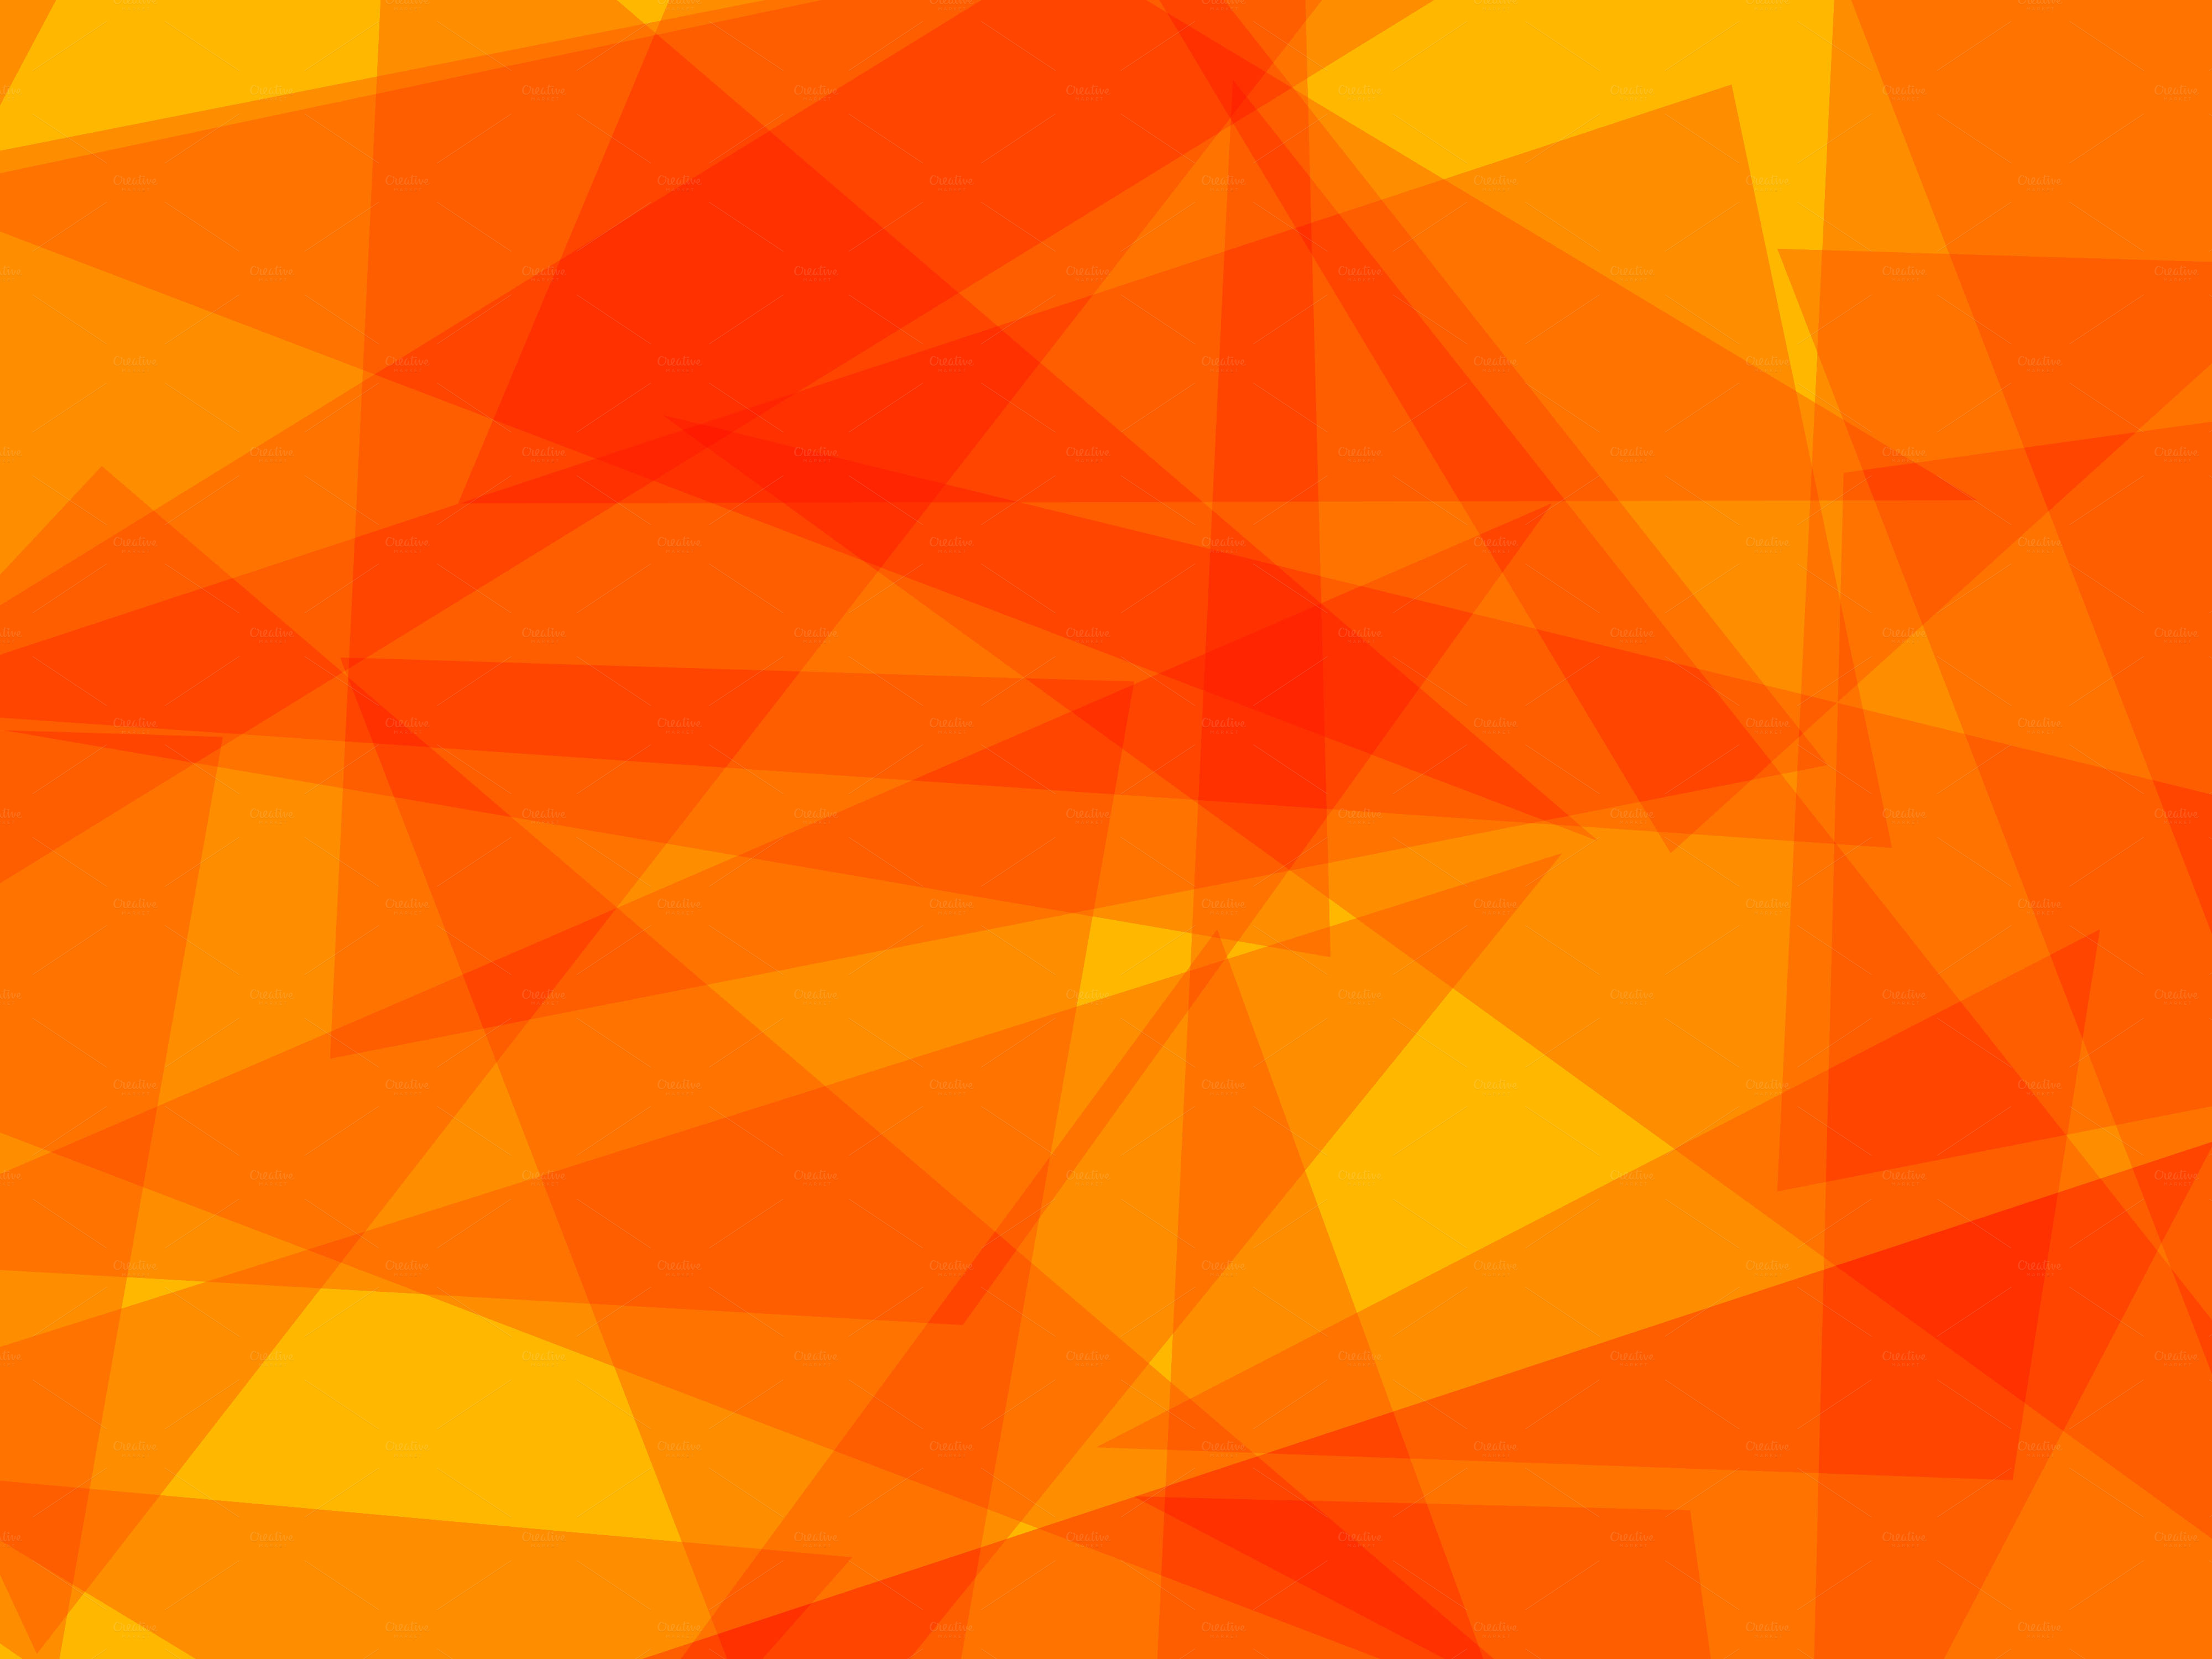 Orange Wallpapers and Background Images - stmed.net